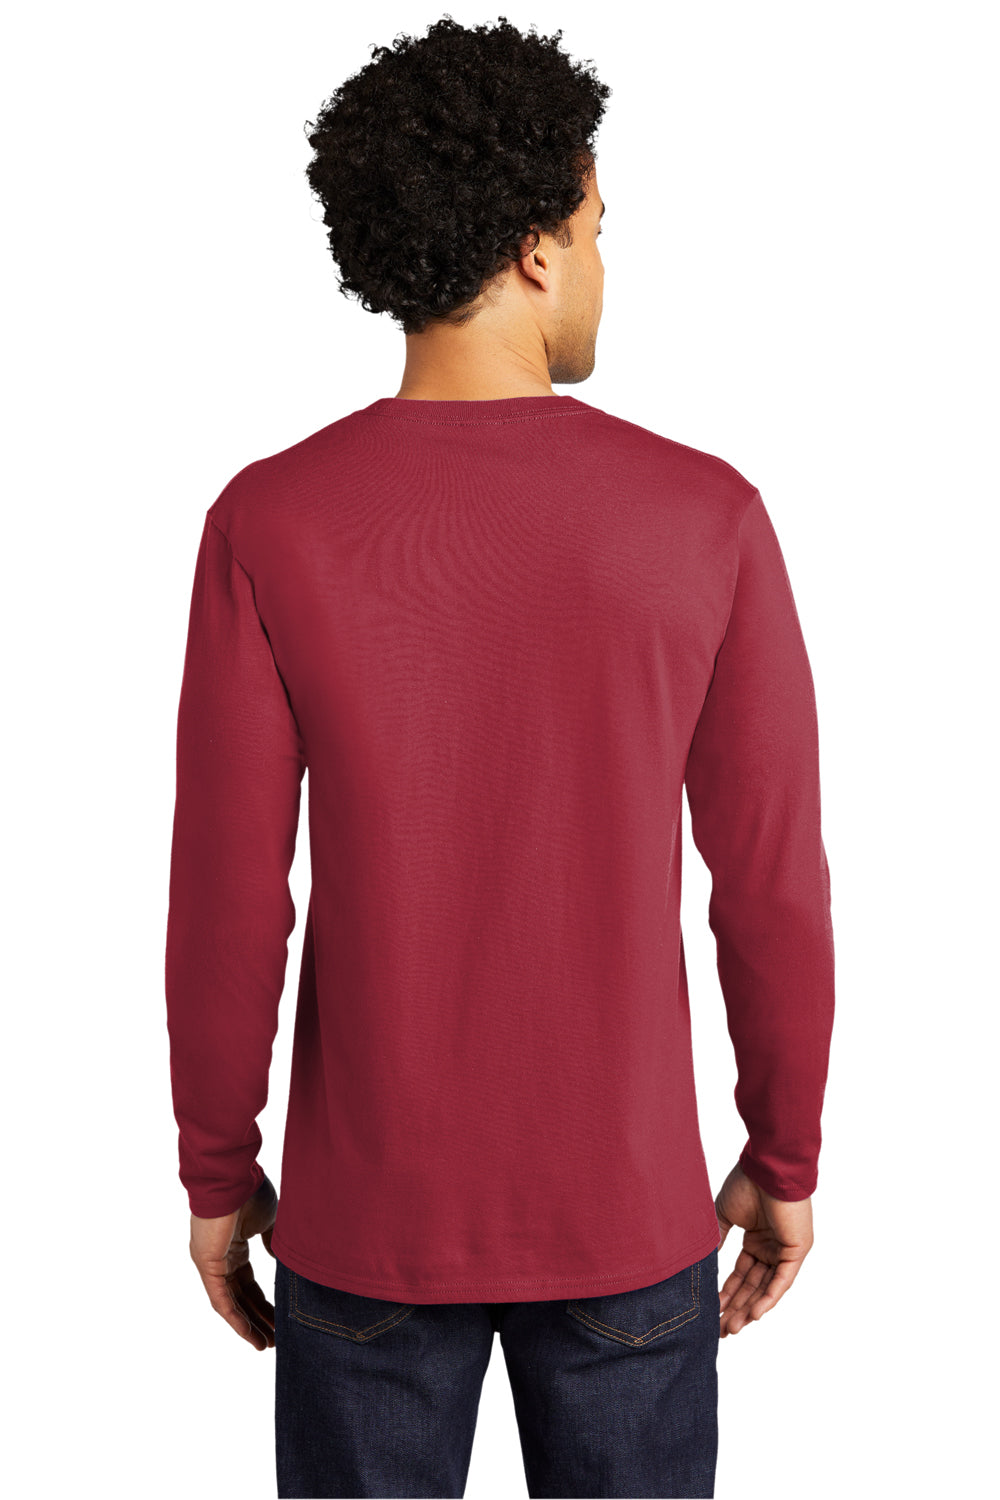 Port & Company Mens Bouncer Long Sleeve Crewneck T-Shirt Rich Red Side